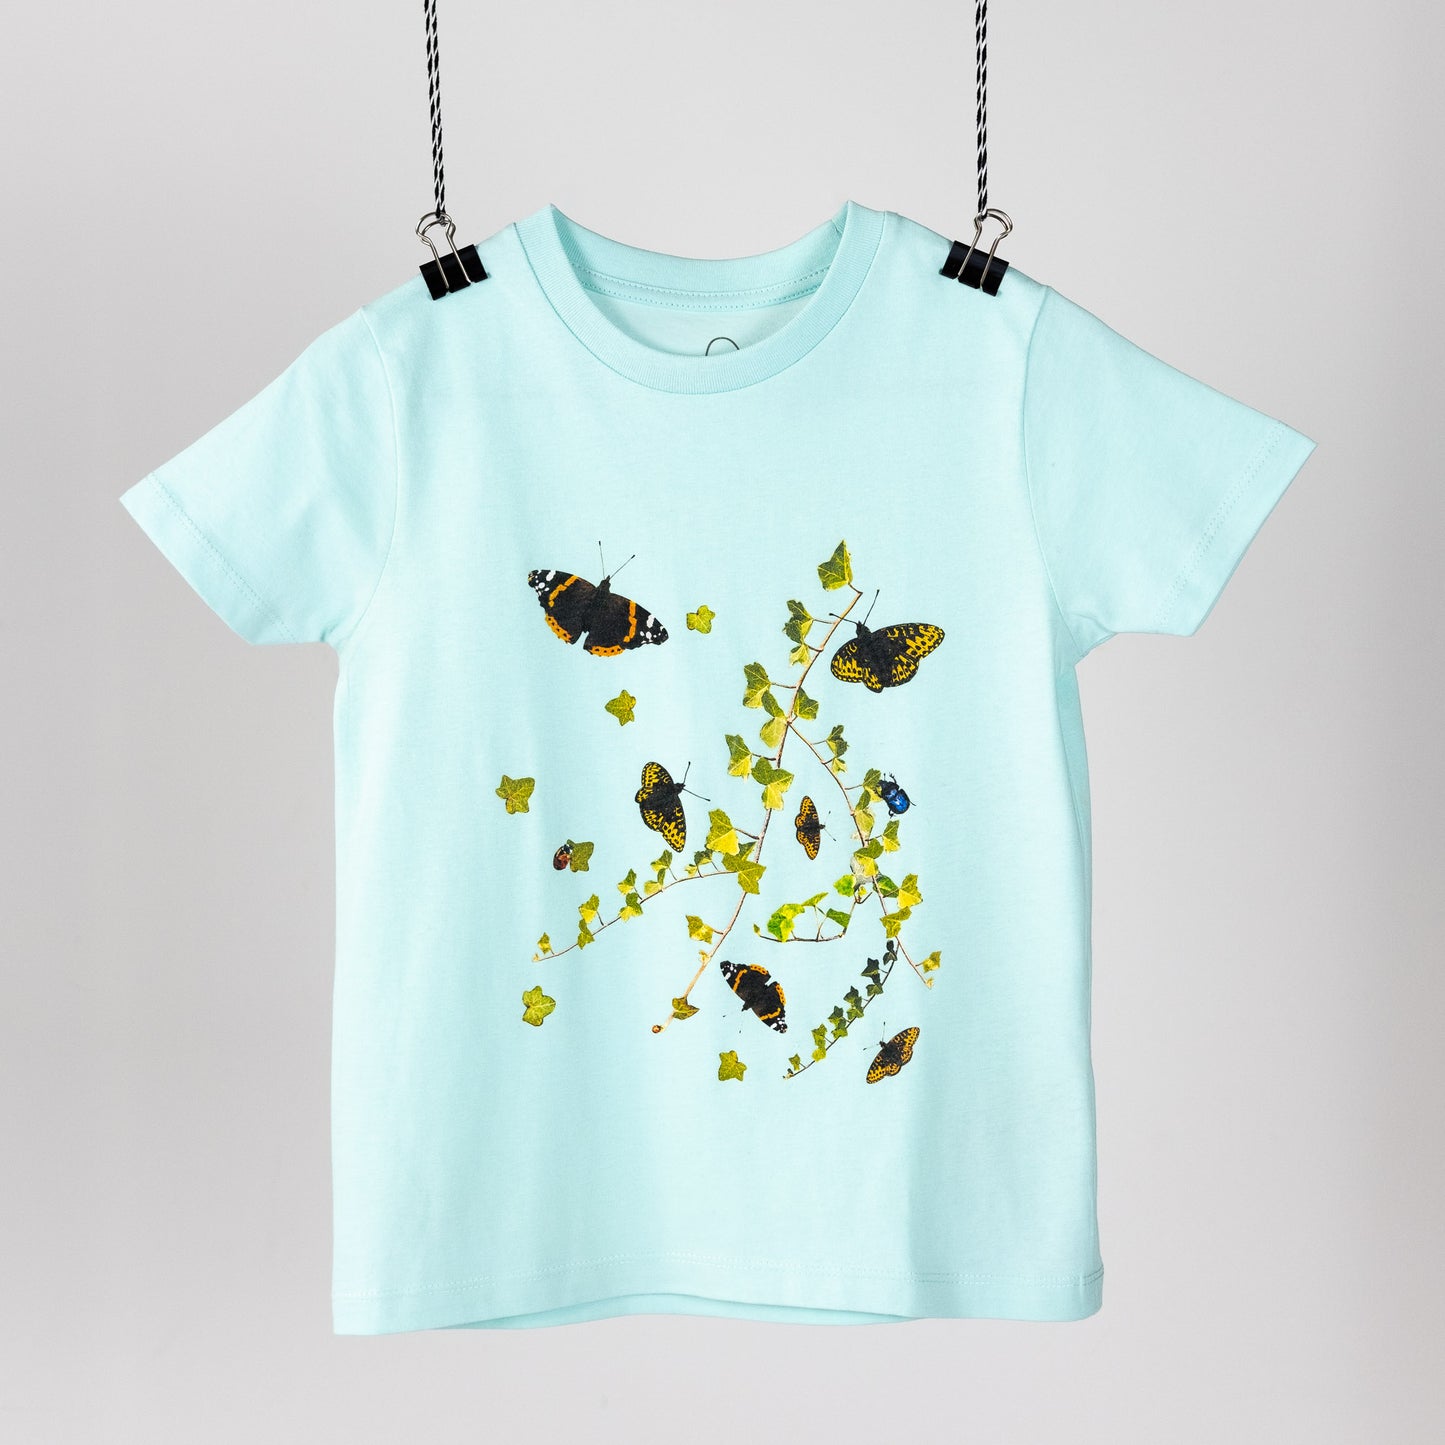 Green children's t-shirt with butterflies, ivy and other insects hanging like a piece of art. Front view 